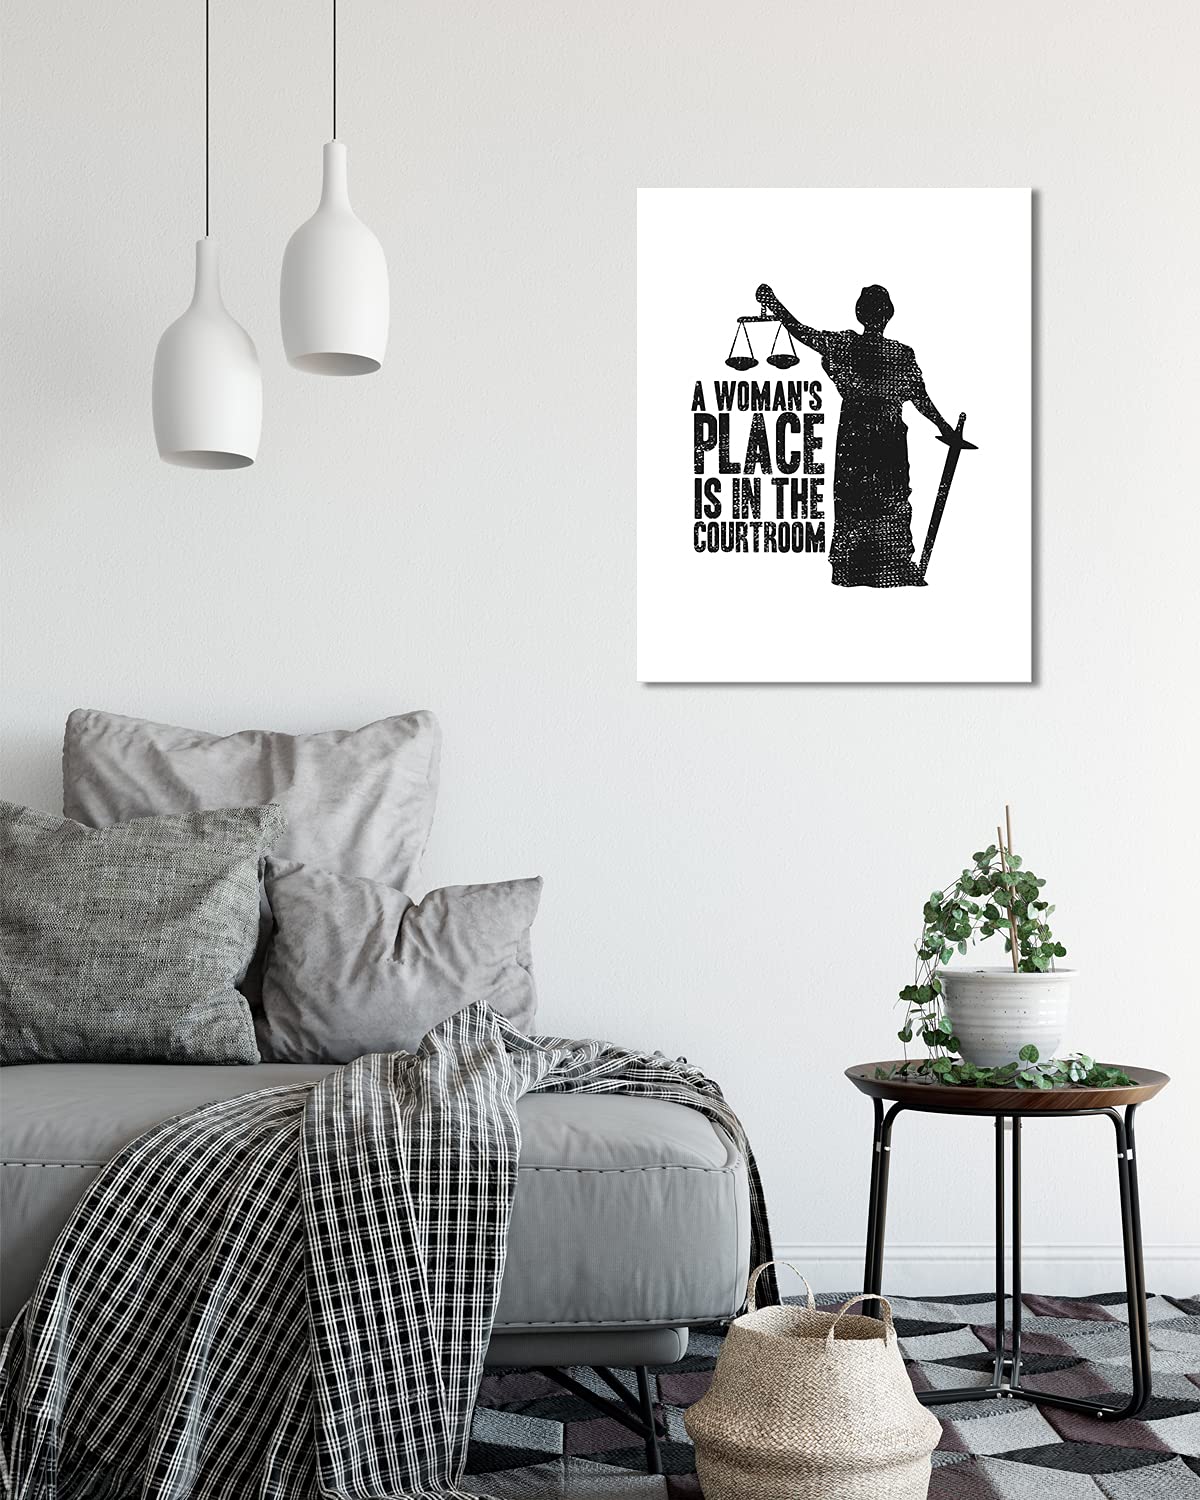 Ruth Bader Ginsburg Wall Art - RBG Inspirational Room Decor - Positive Quote for Attorney, Liberal Feminist, Law School Student or Graduate - Lawyer Gifts for Women